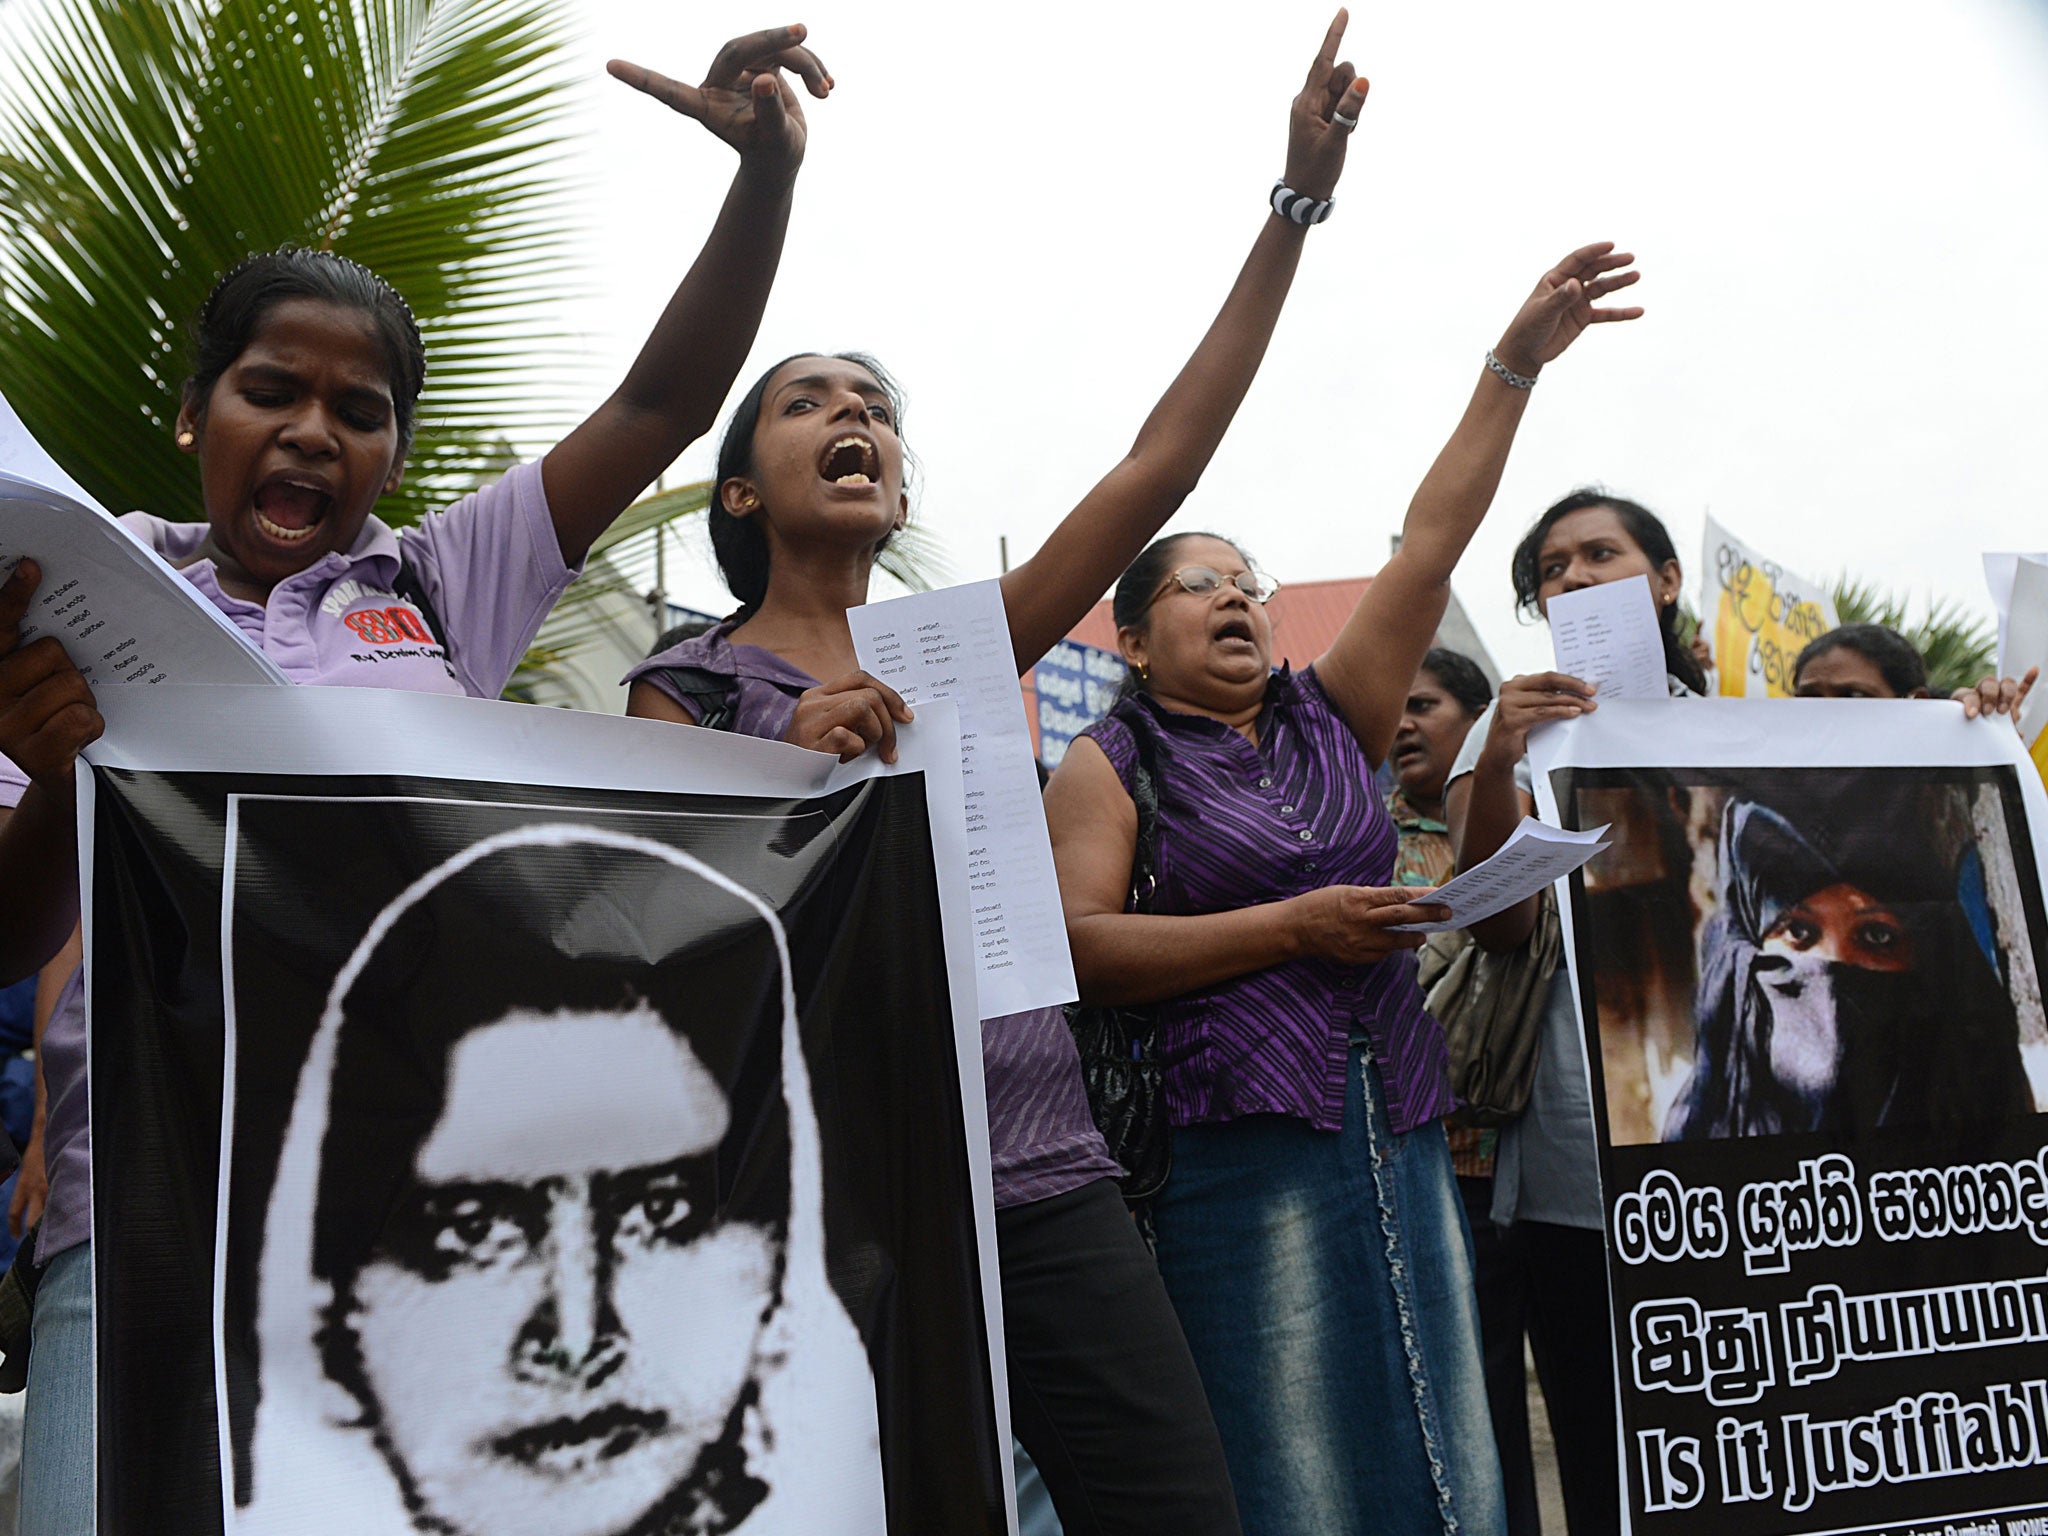 Sri Lankan activists hold up a portrait of Rizana Nafeek as they shout slogans during a protest in Colombo January 11, 2013, following her execution by Saudi authorities. Nafeek, convicted for murdering an infant under her care, was executed by Saudi Arabian authorities on Wednesday despite appeals for clemency from Sri Lankan President Mahinda Rajapaksa.